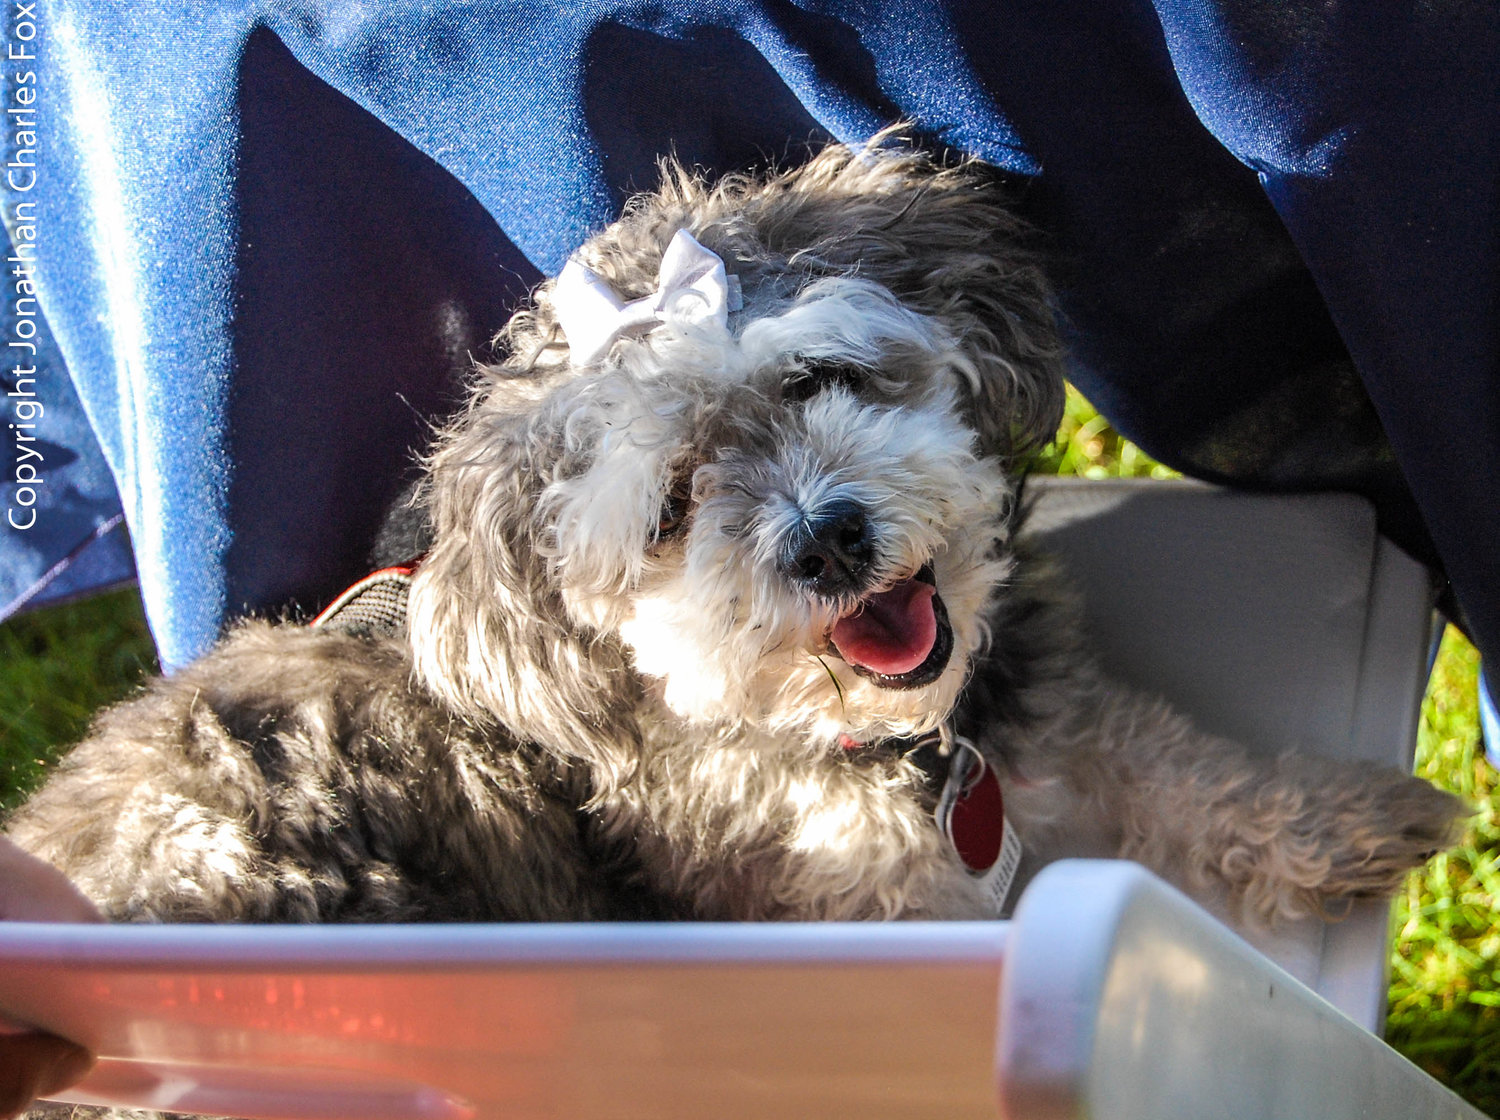 The Havanese are known as “happy, playful and intelligent.” Well, duh.